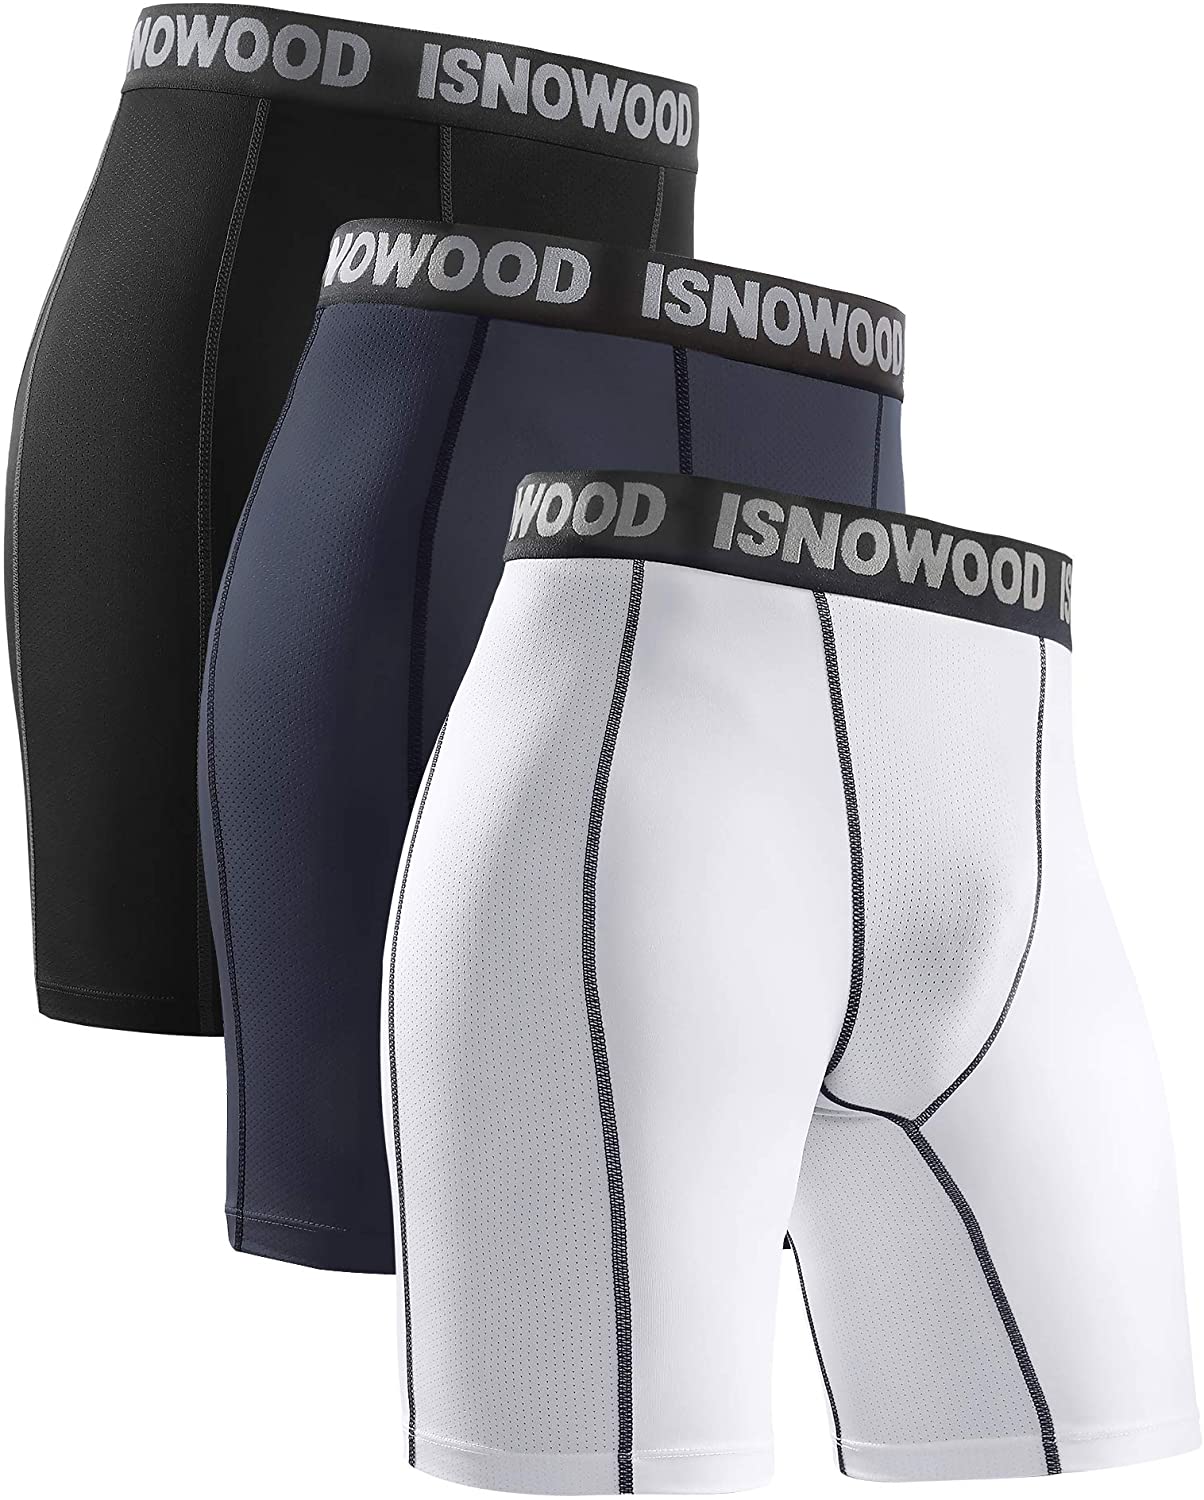 isnowood Compression Shorts for Men Spandex Running Workout Athletic Underwear 